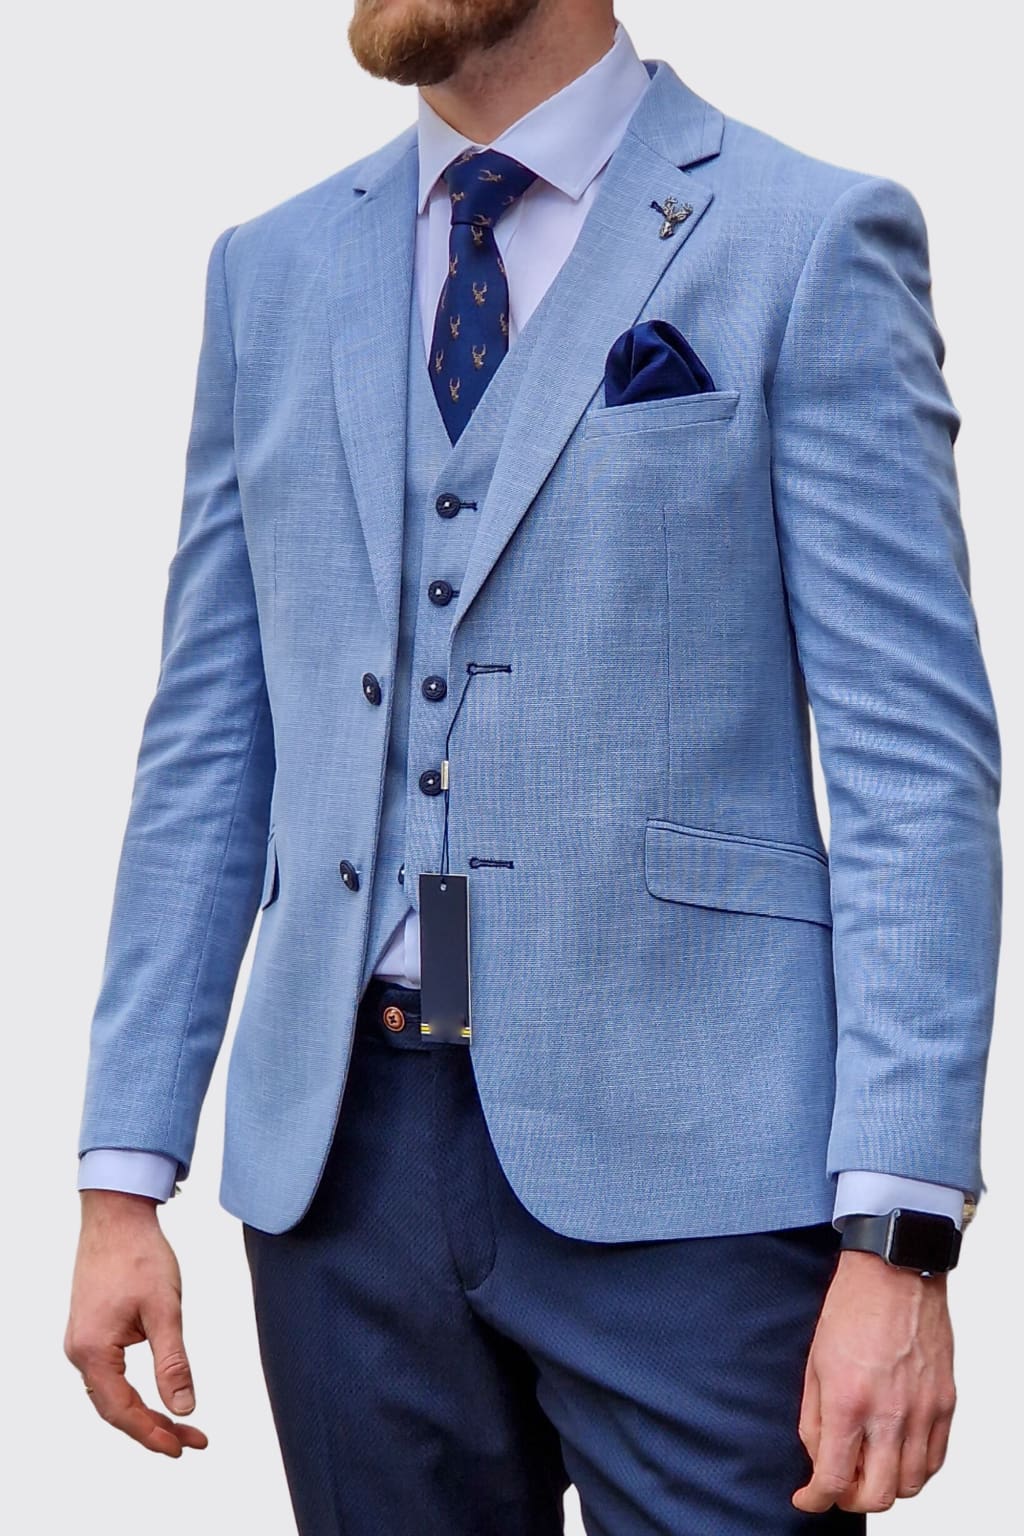 Skinny fit blue trousers and waistcoat with green jacket | ASOS